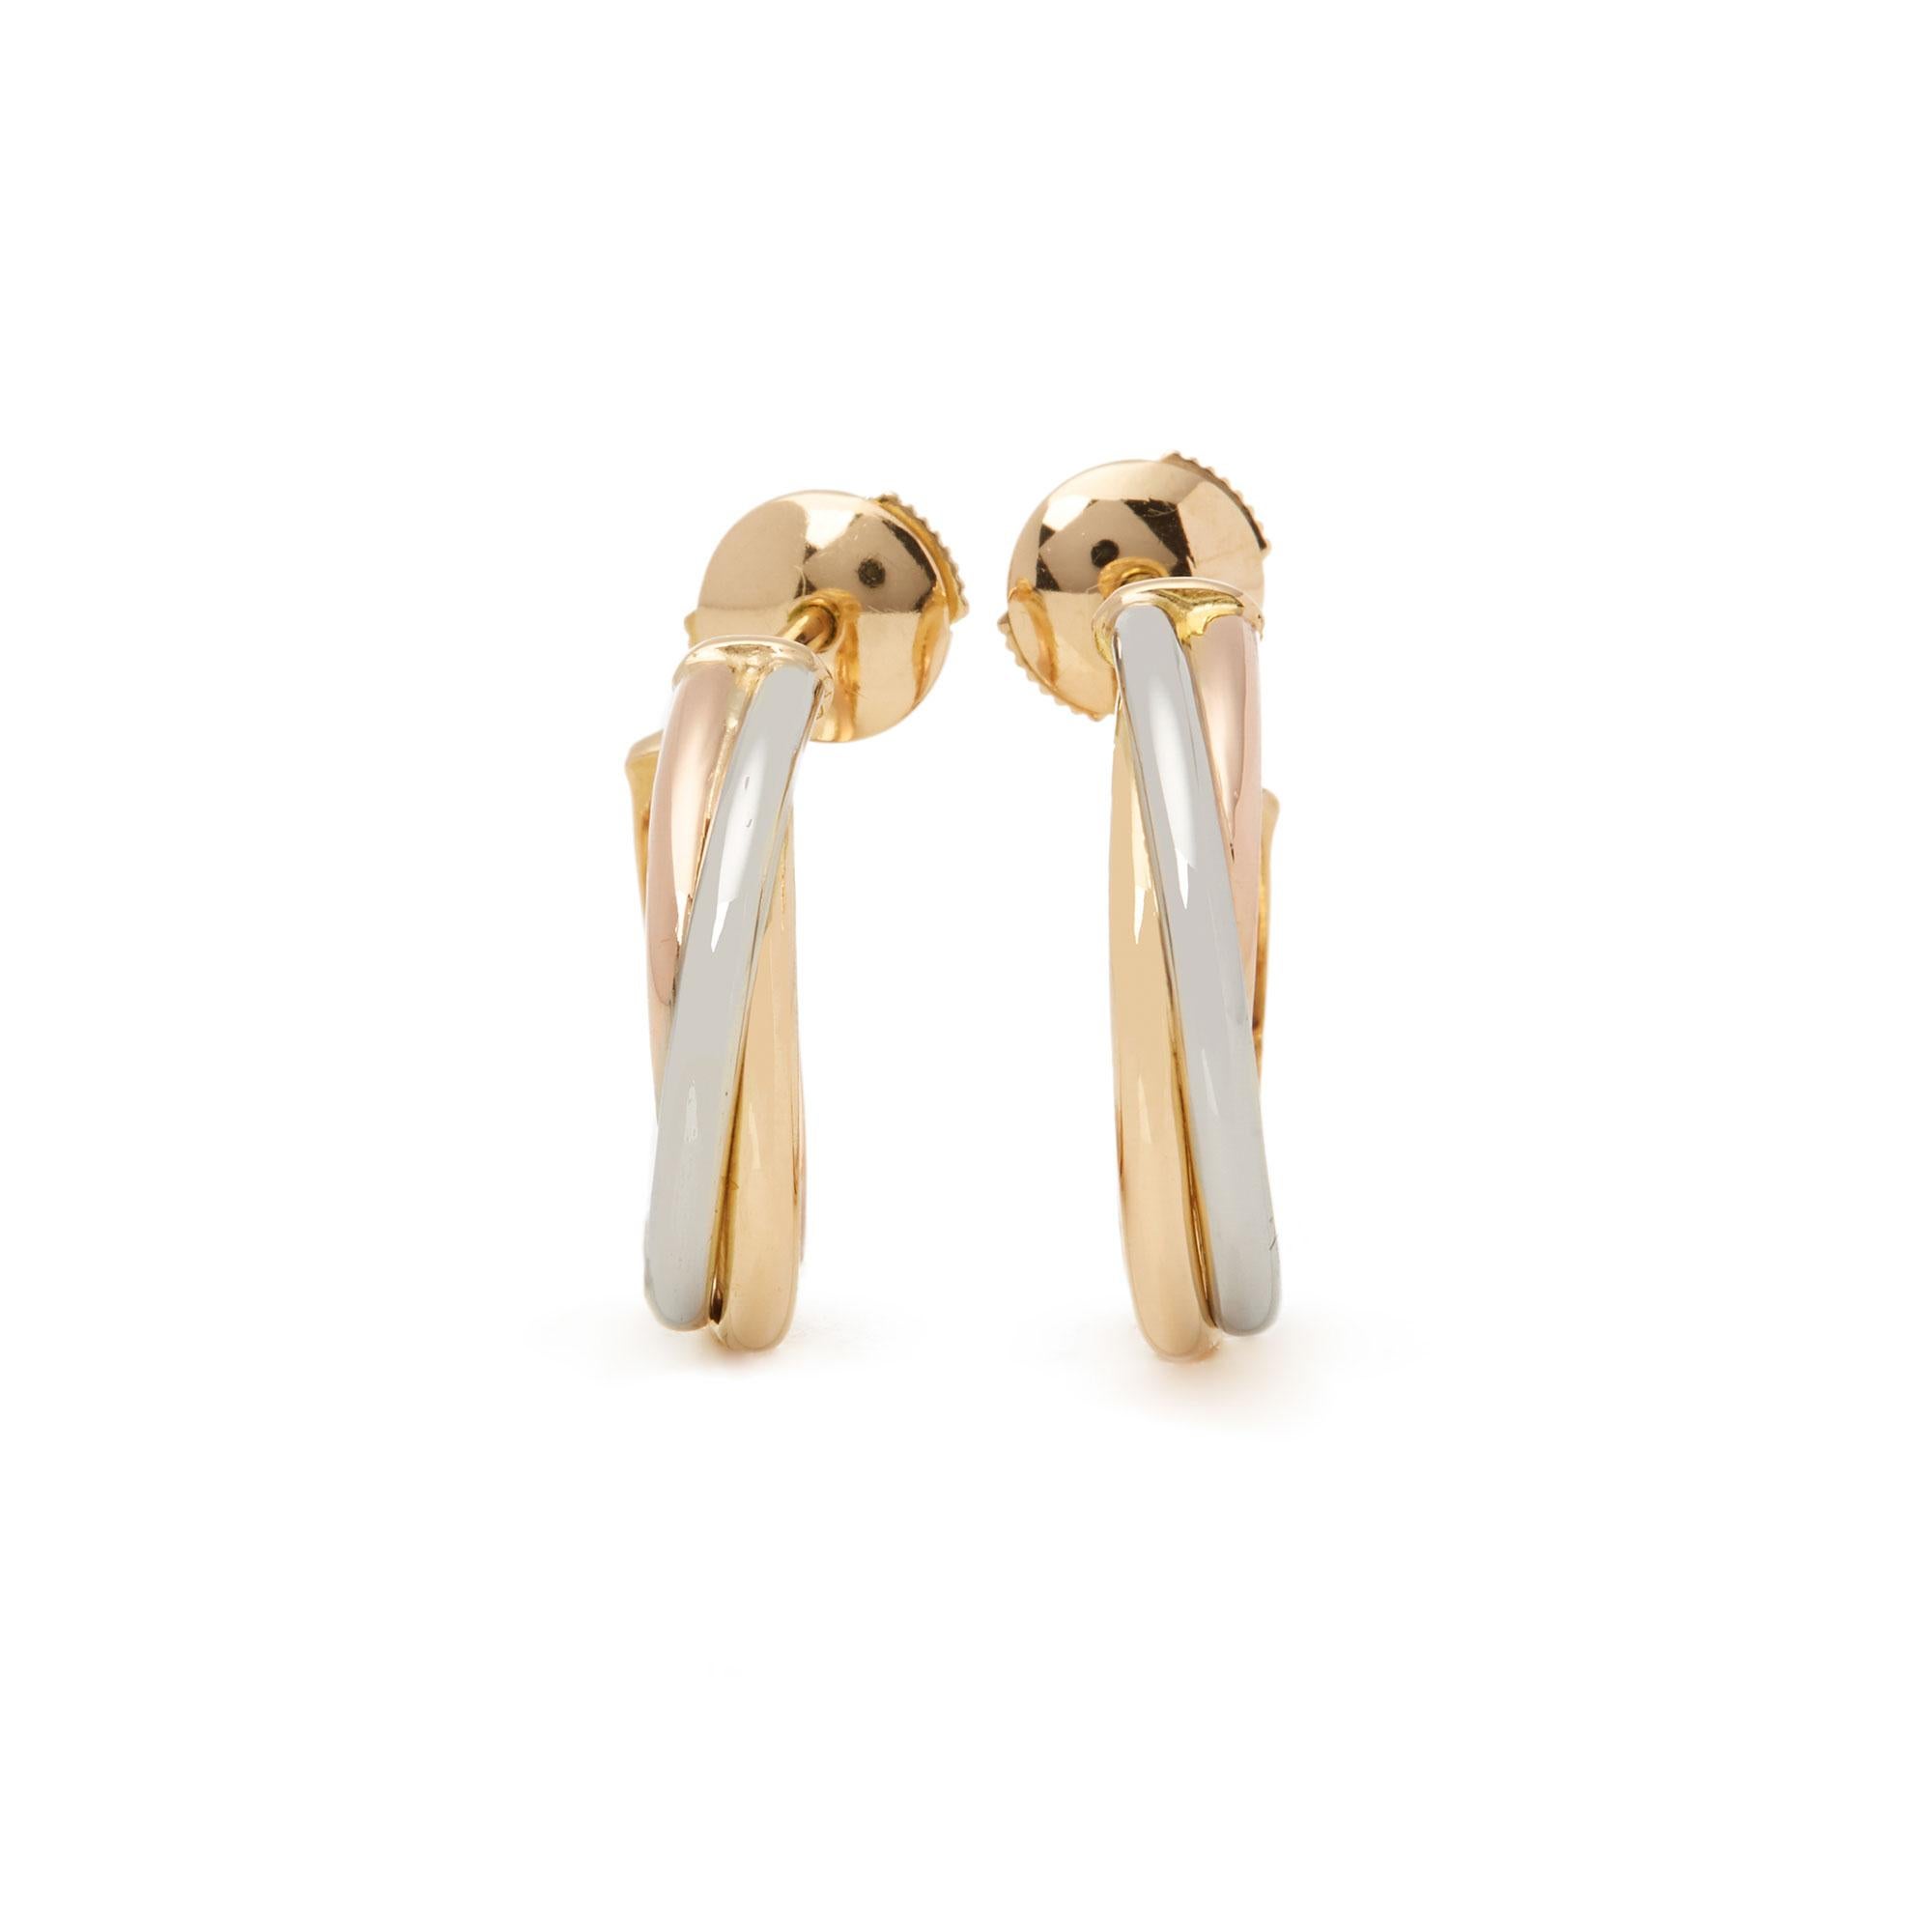 These earrings by Cartier are from their Trinity Collection and feature a twisted design in tri colour 18ct gold with a post and push back fitting. Complete with Cartier box. Our Xupes reference is J586 should you need to quote this.